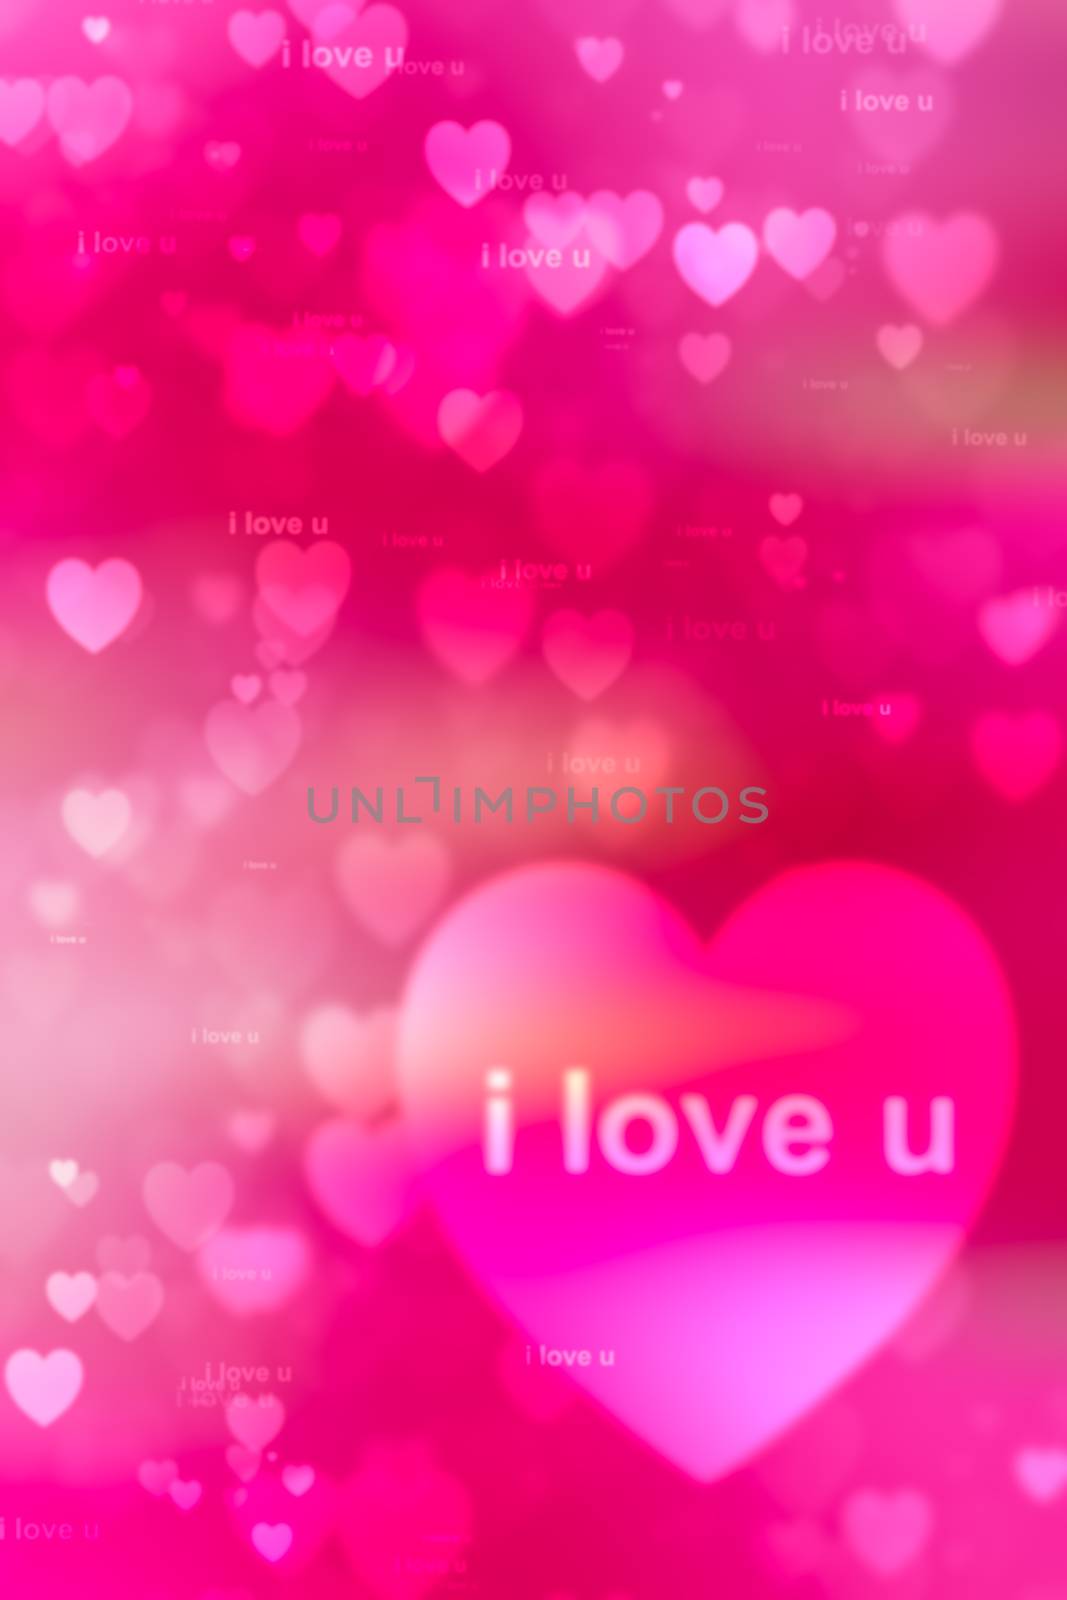 words i love you as red background by a3701027